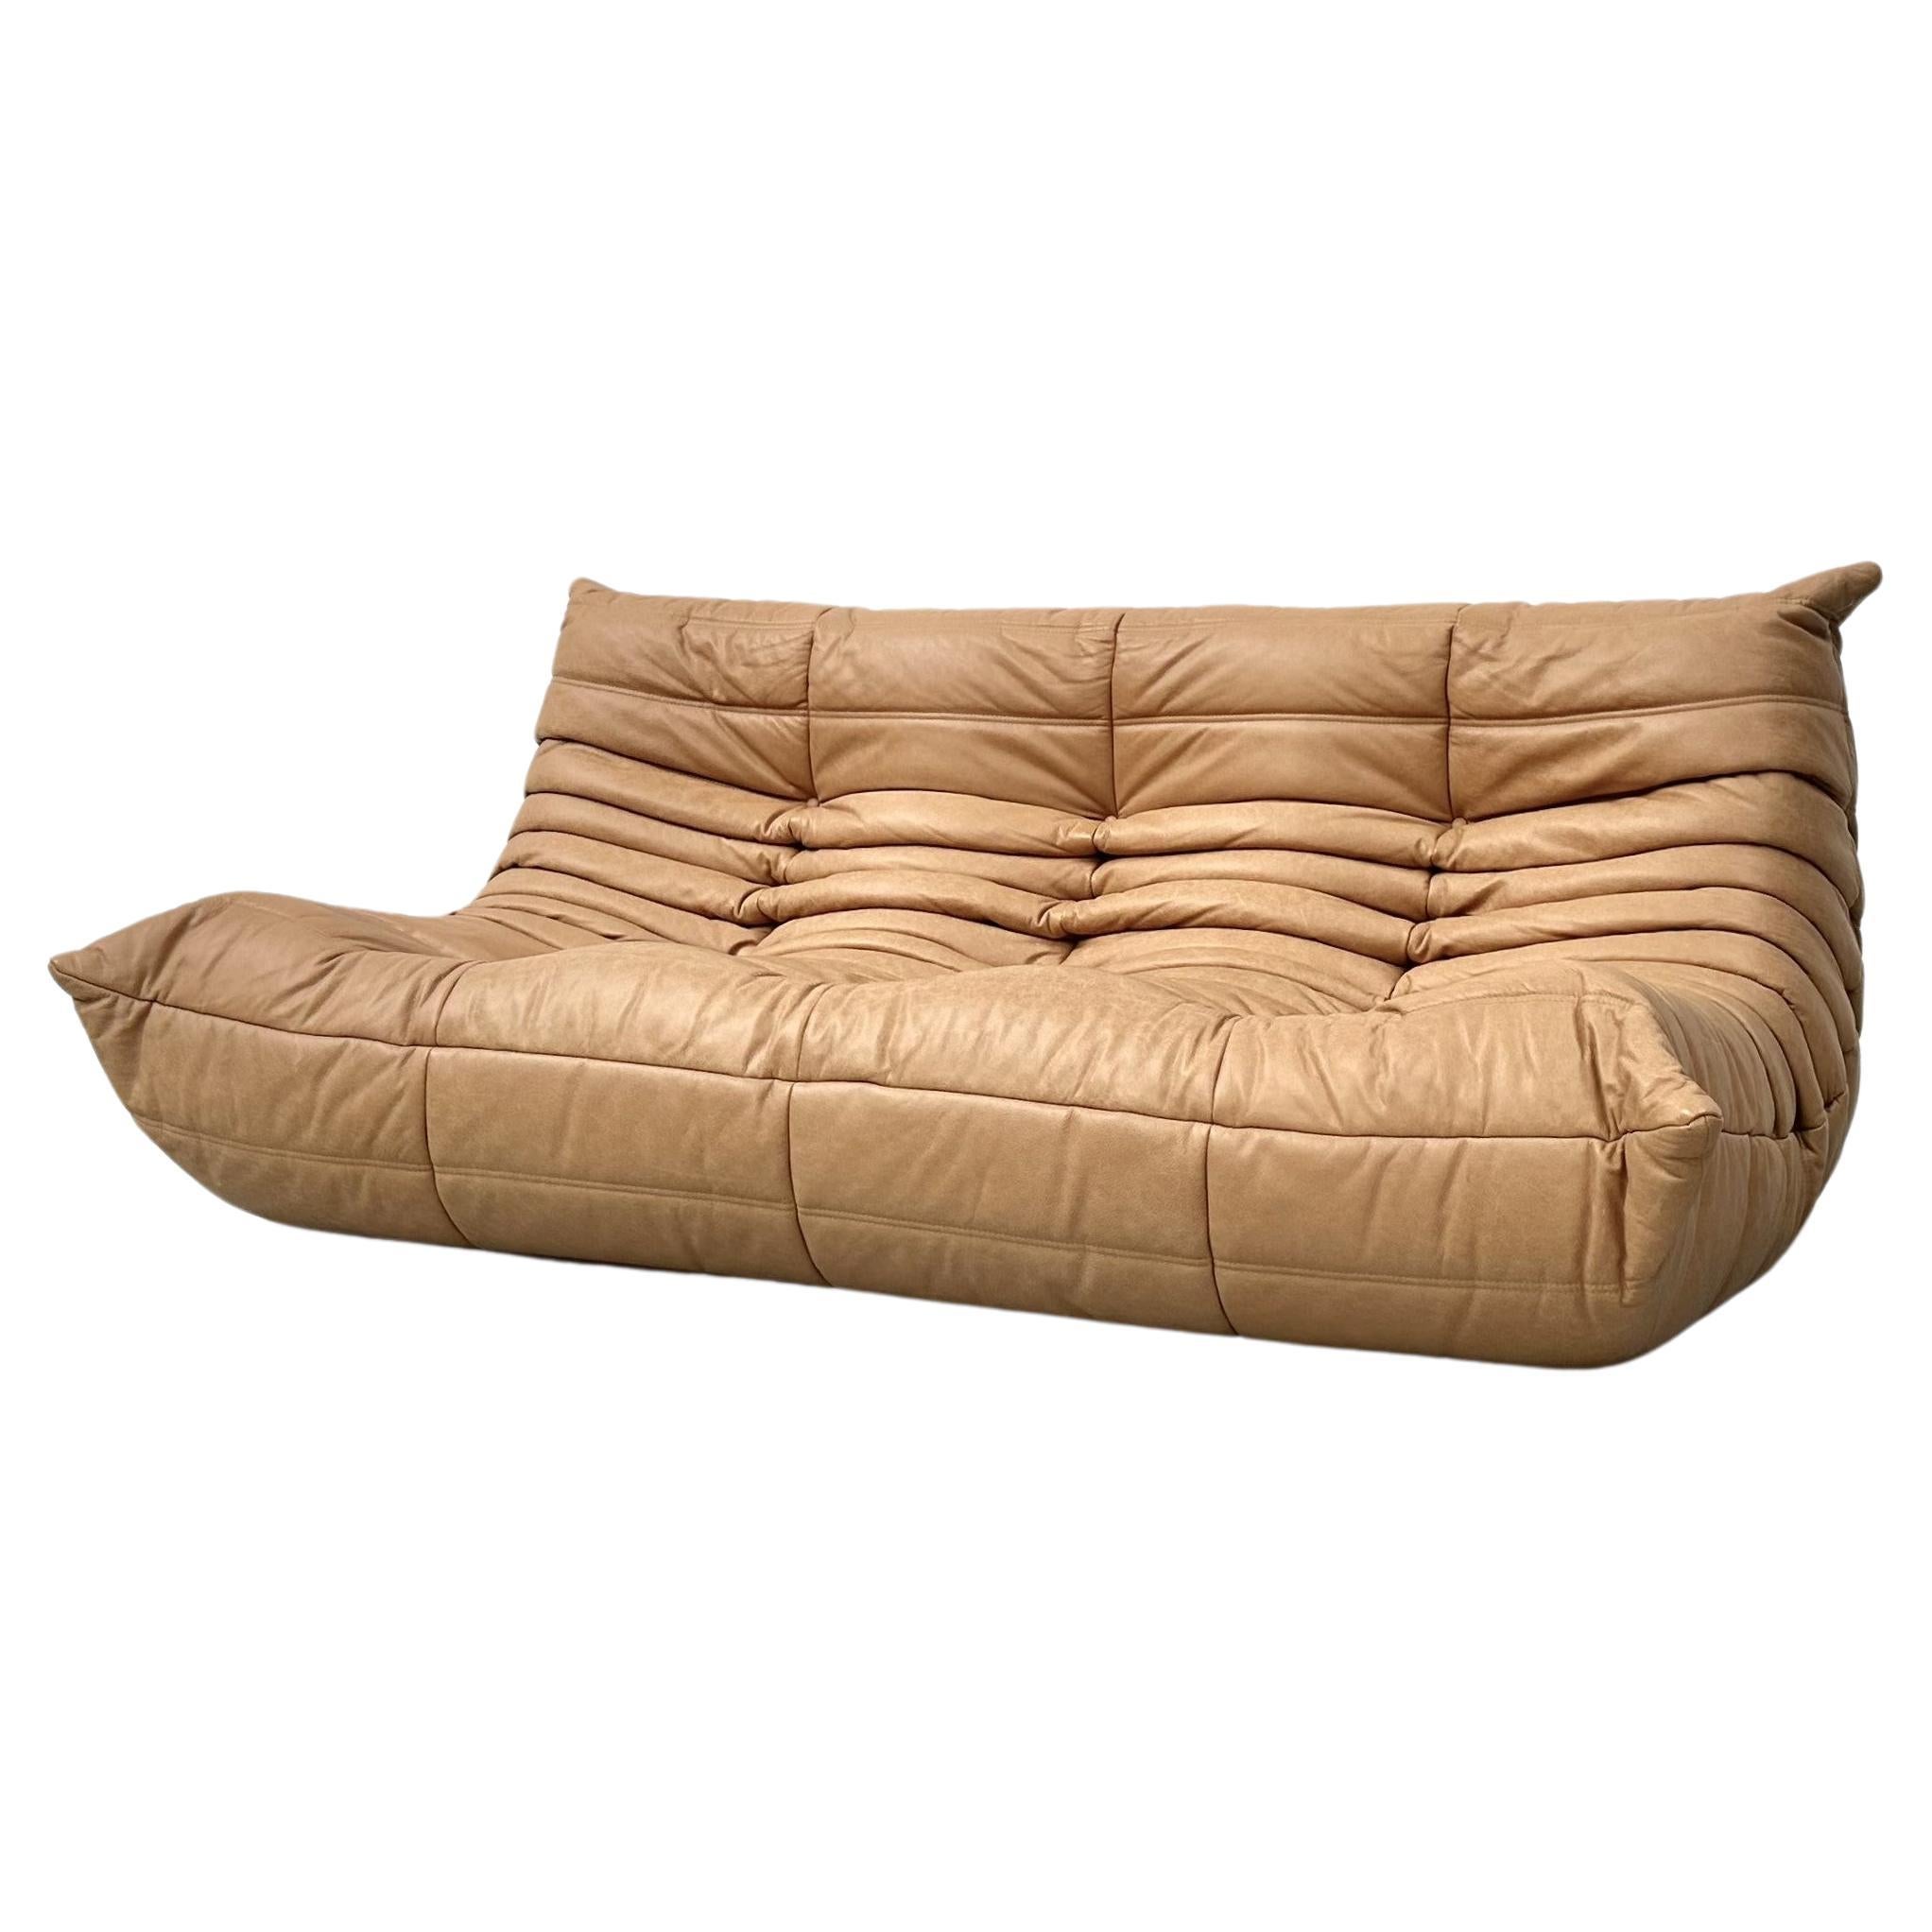 French Togo Sofa in Camel Leather by Michel Ducaroy for Ligne Roset.